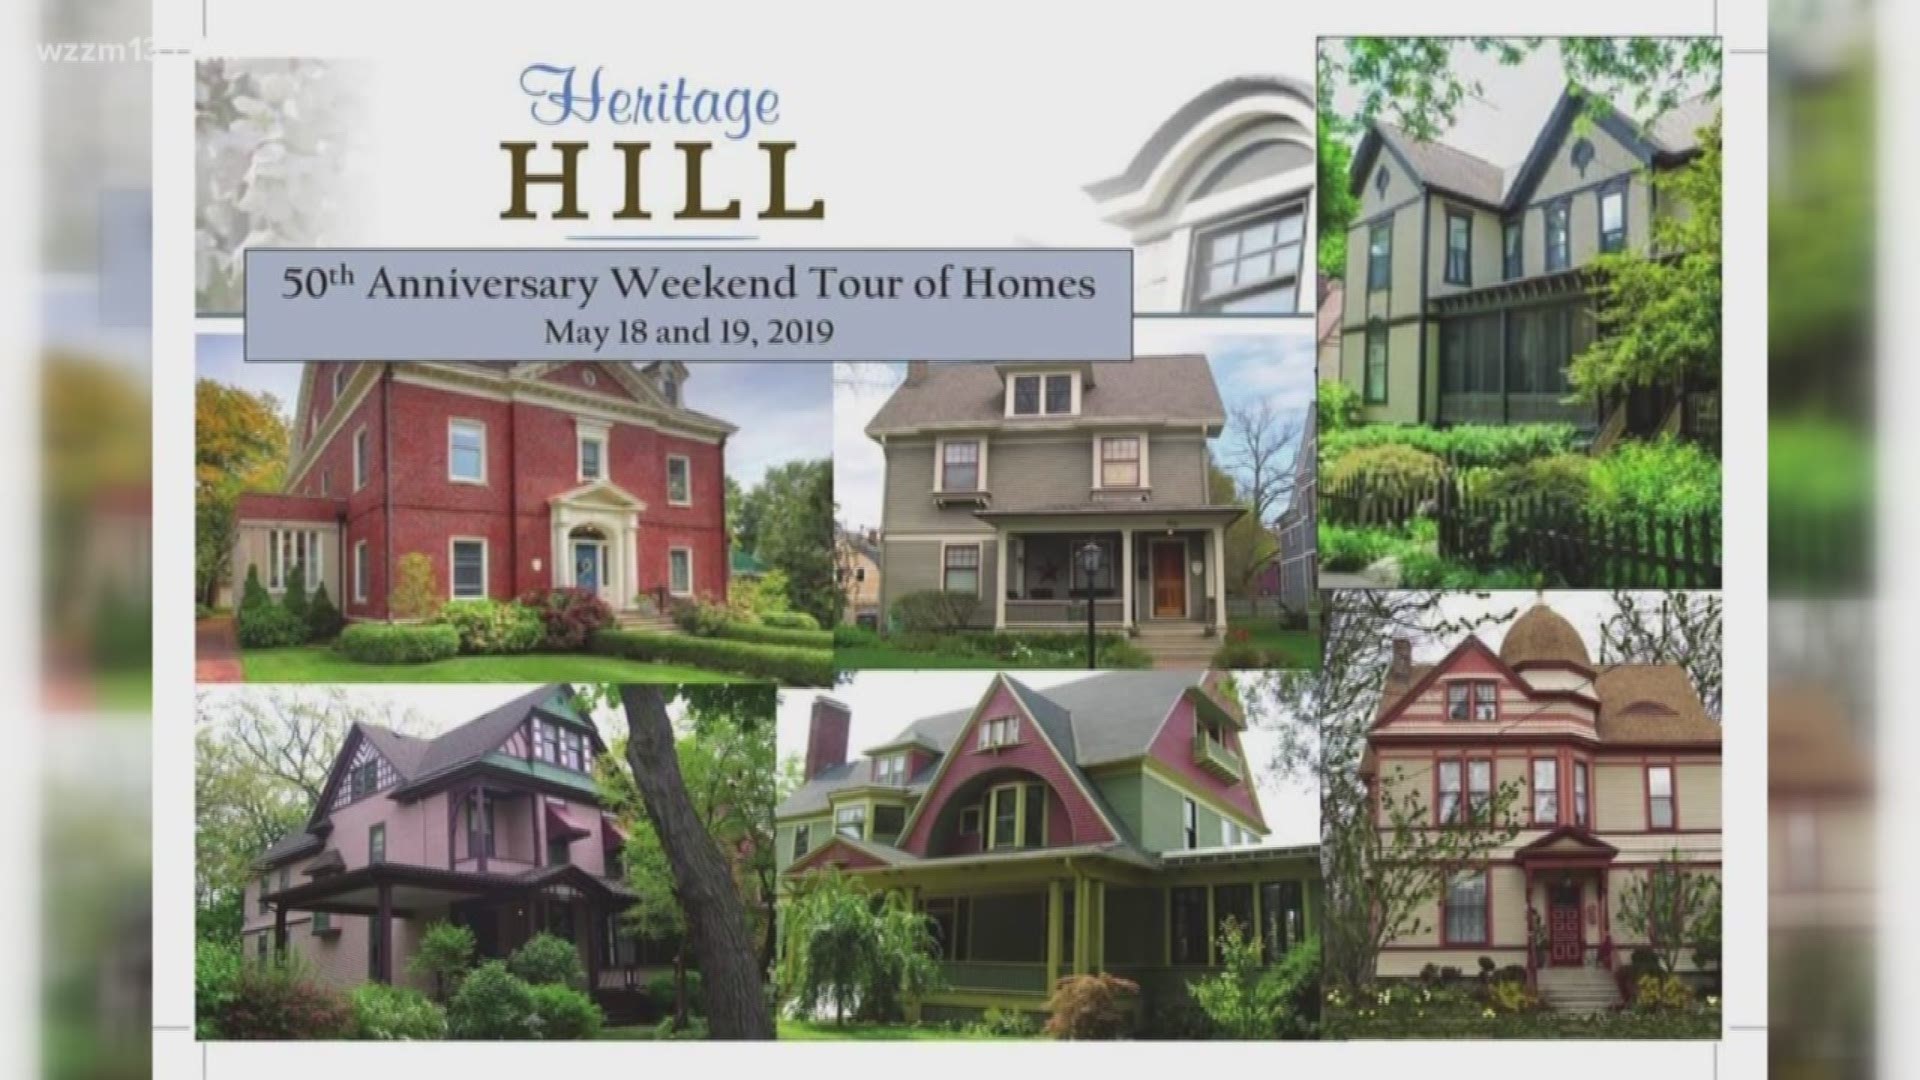 There is much to celebrate on this, the 50th Anniversary of the Annual Heritage Hill Weekend Tour of Homes.